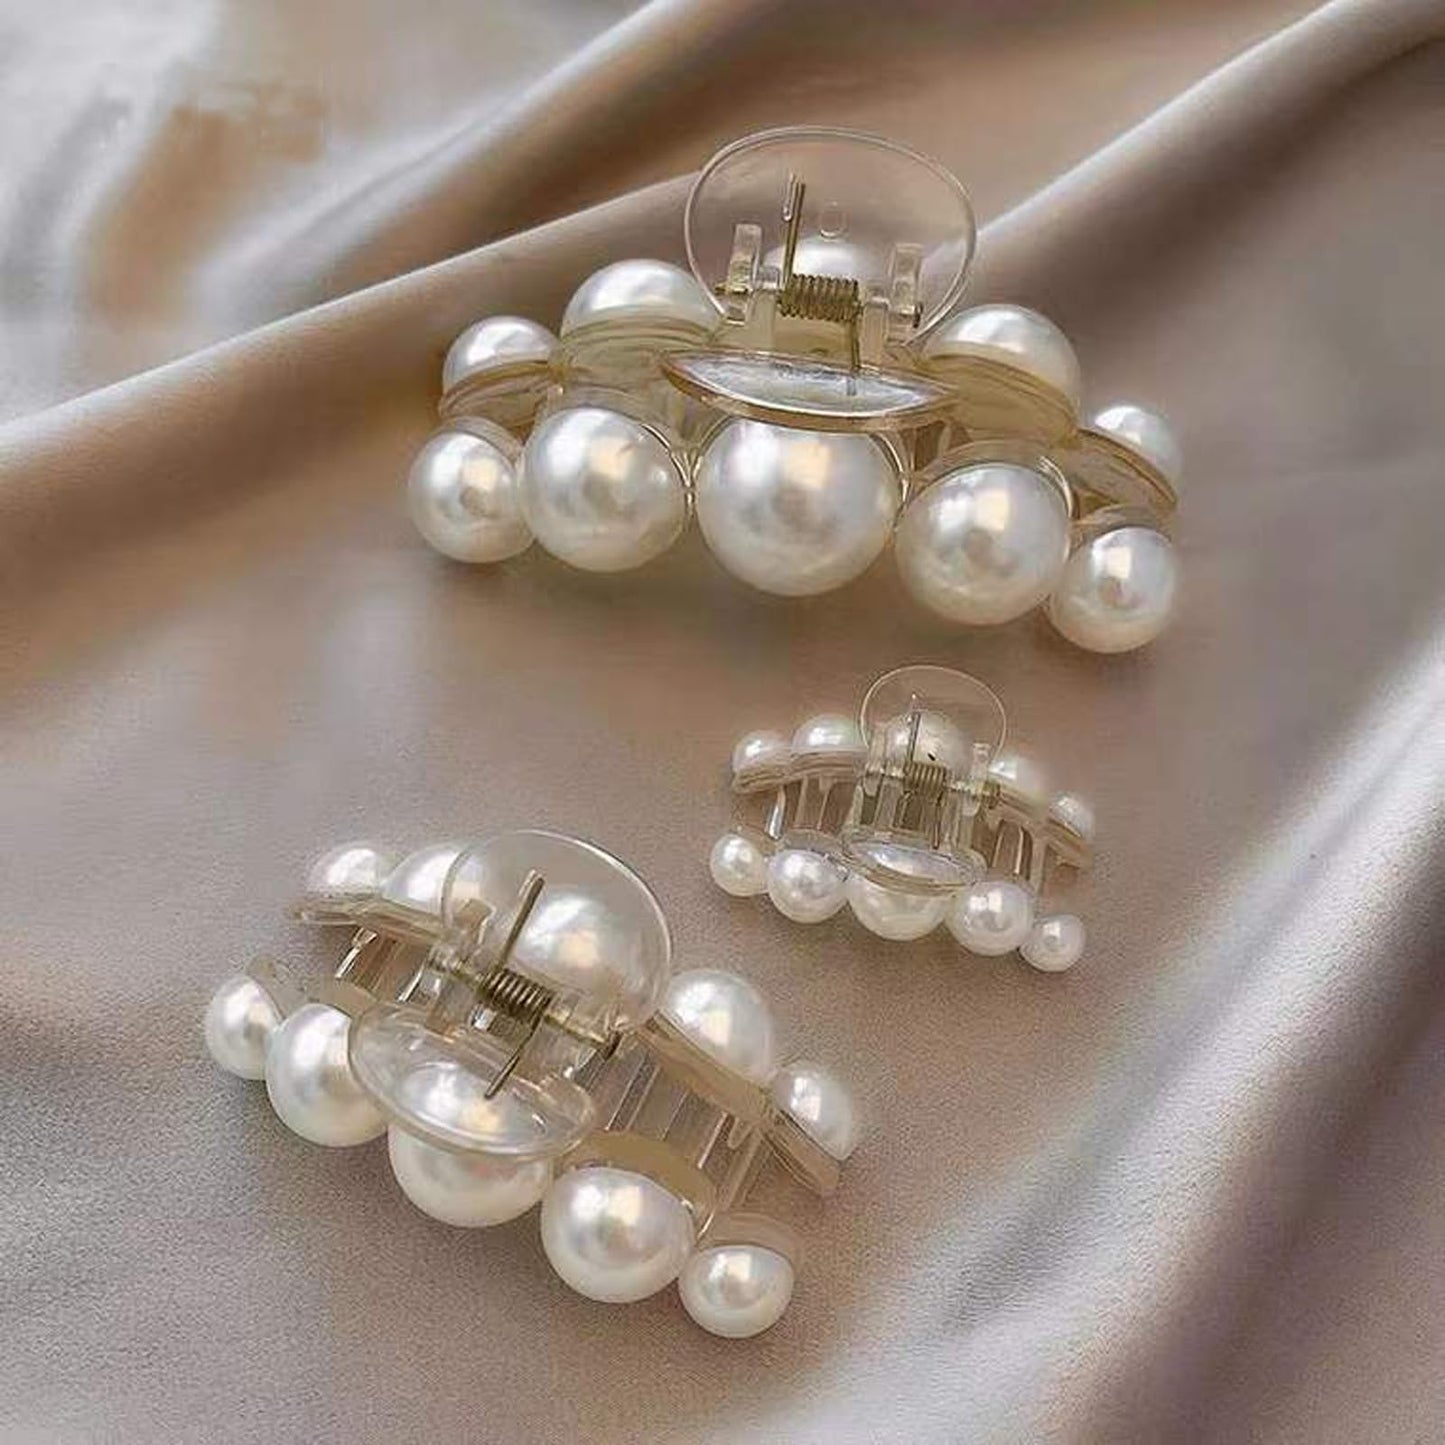 Agirlvct Pearl Hair Clip,Styling Hair Clips Strong Hold Jaw Clips,Big Pearl Hair Claw Clips Barrettes Nonslip Hair Accessories Birthday Valentine's Day Gift for Women Girls Daughter Girlfriend(6 Pack)